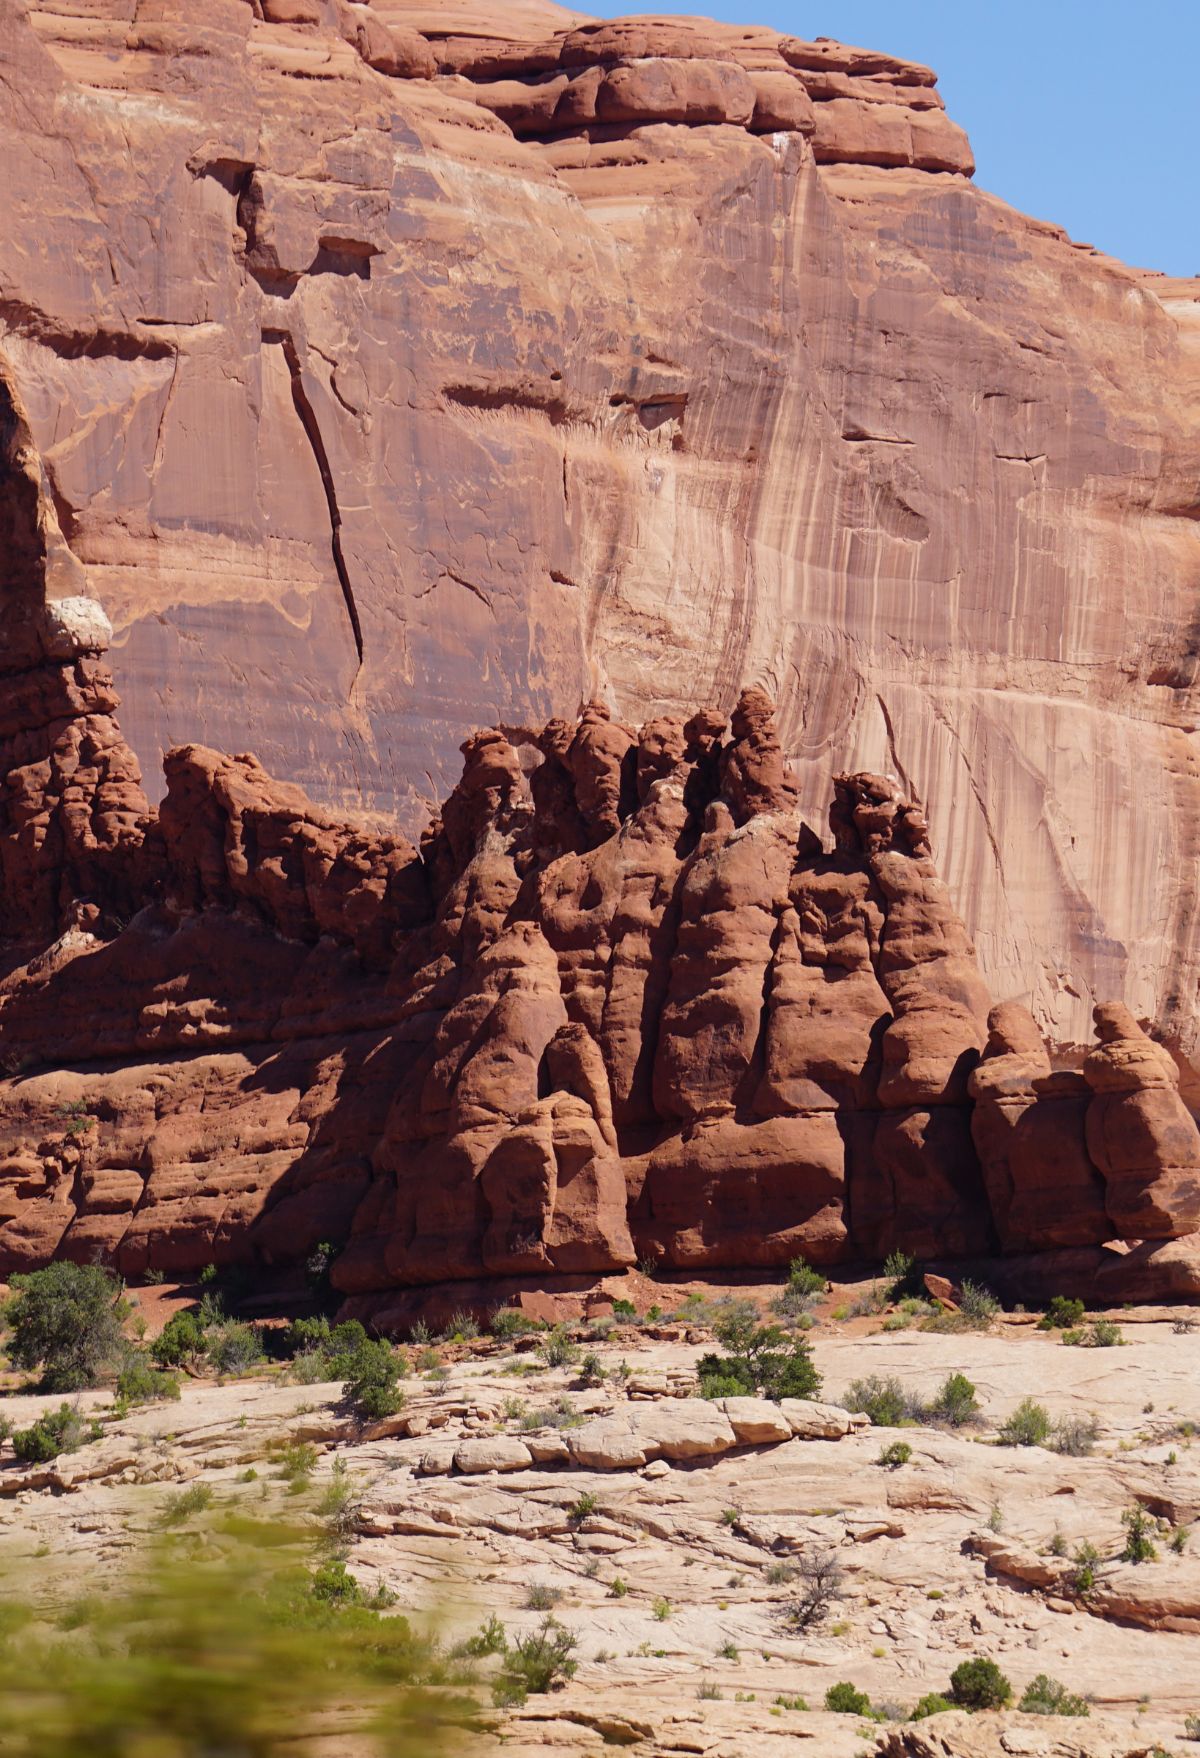 A red rock formation in the desert. Canyonlands National Park